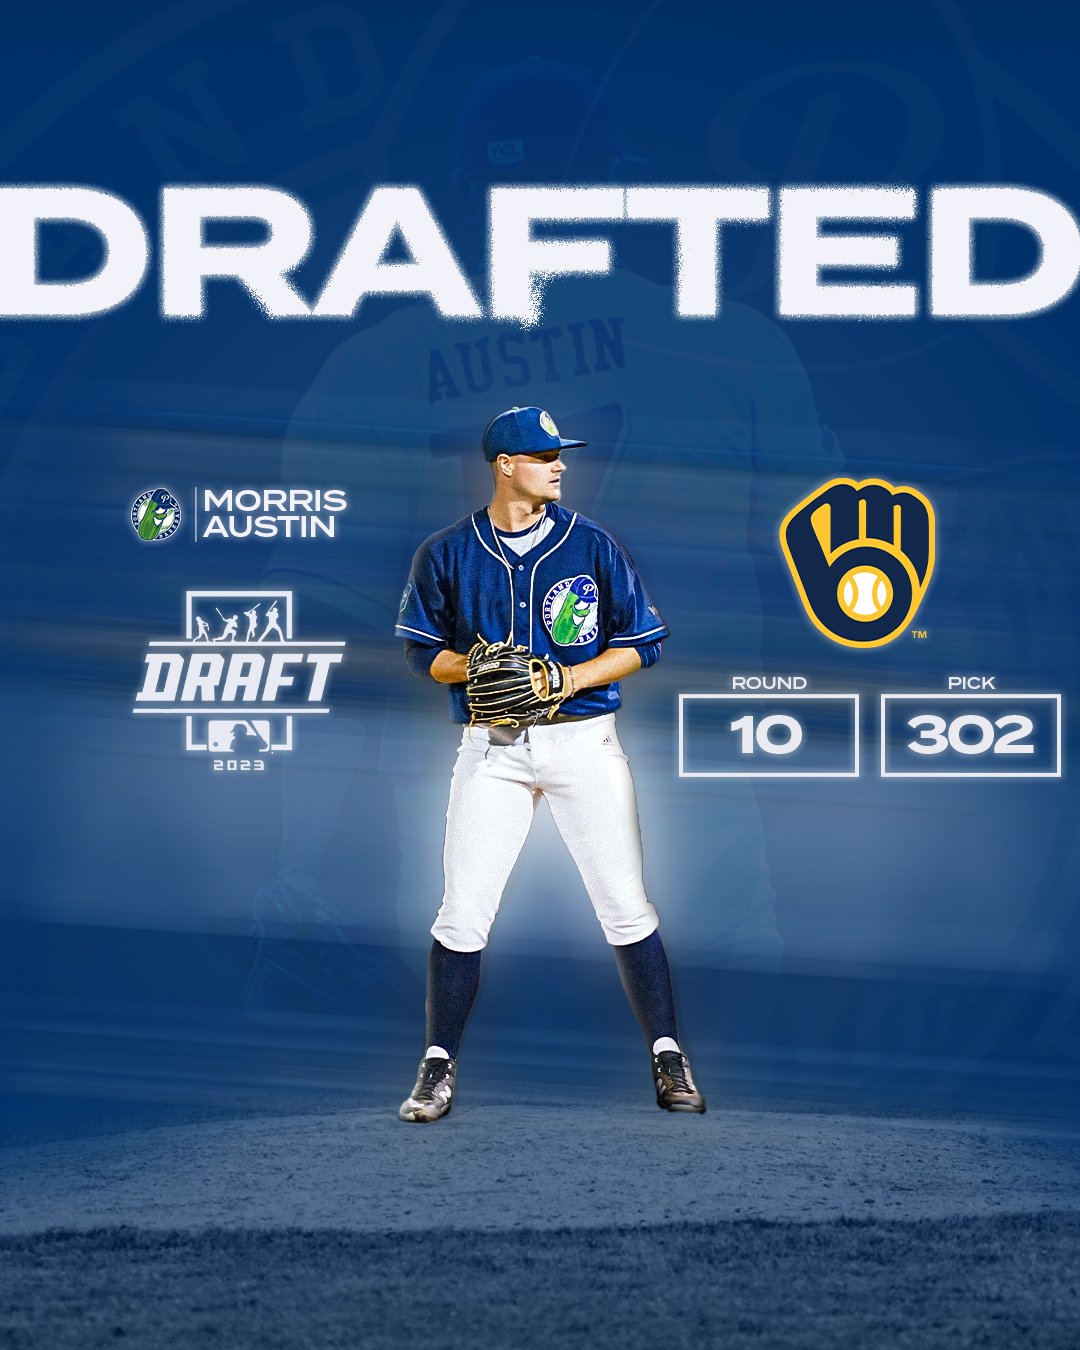 Morris Austin Is Selected In 10th Round of MLB Draft — PORTLAND PICKLES